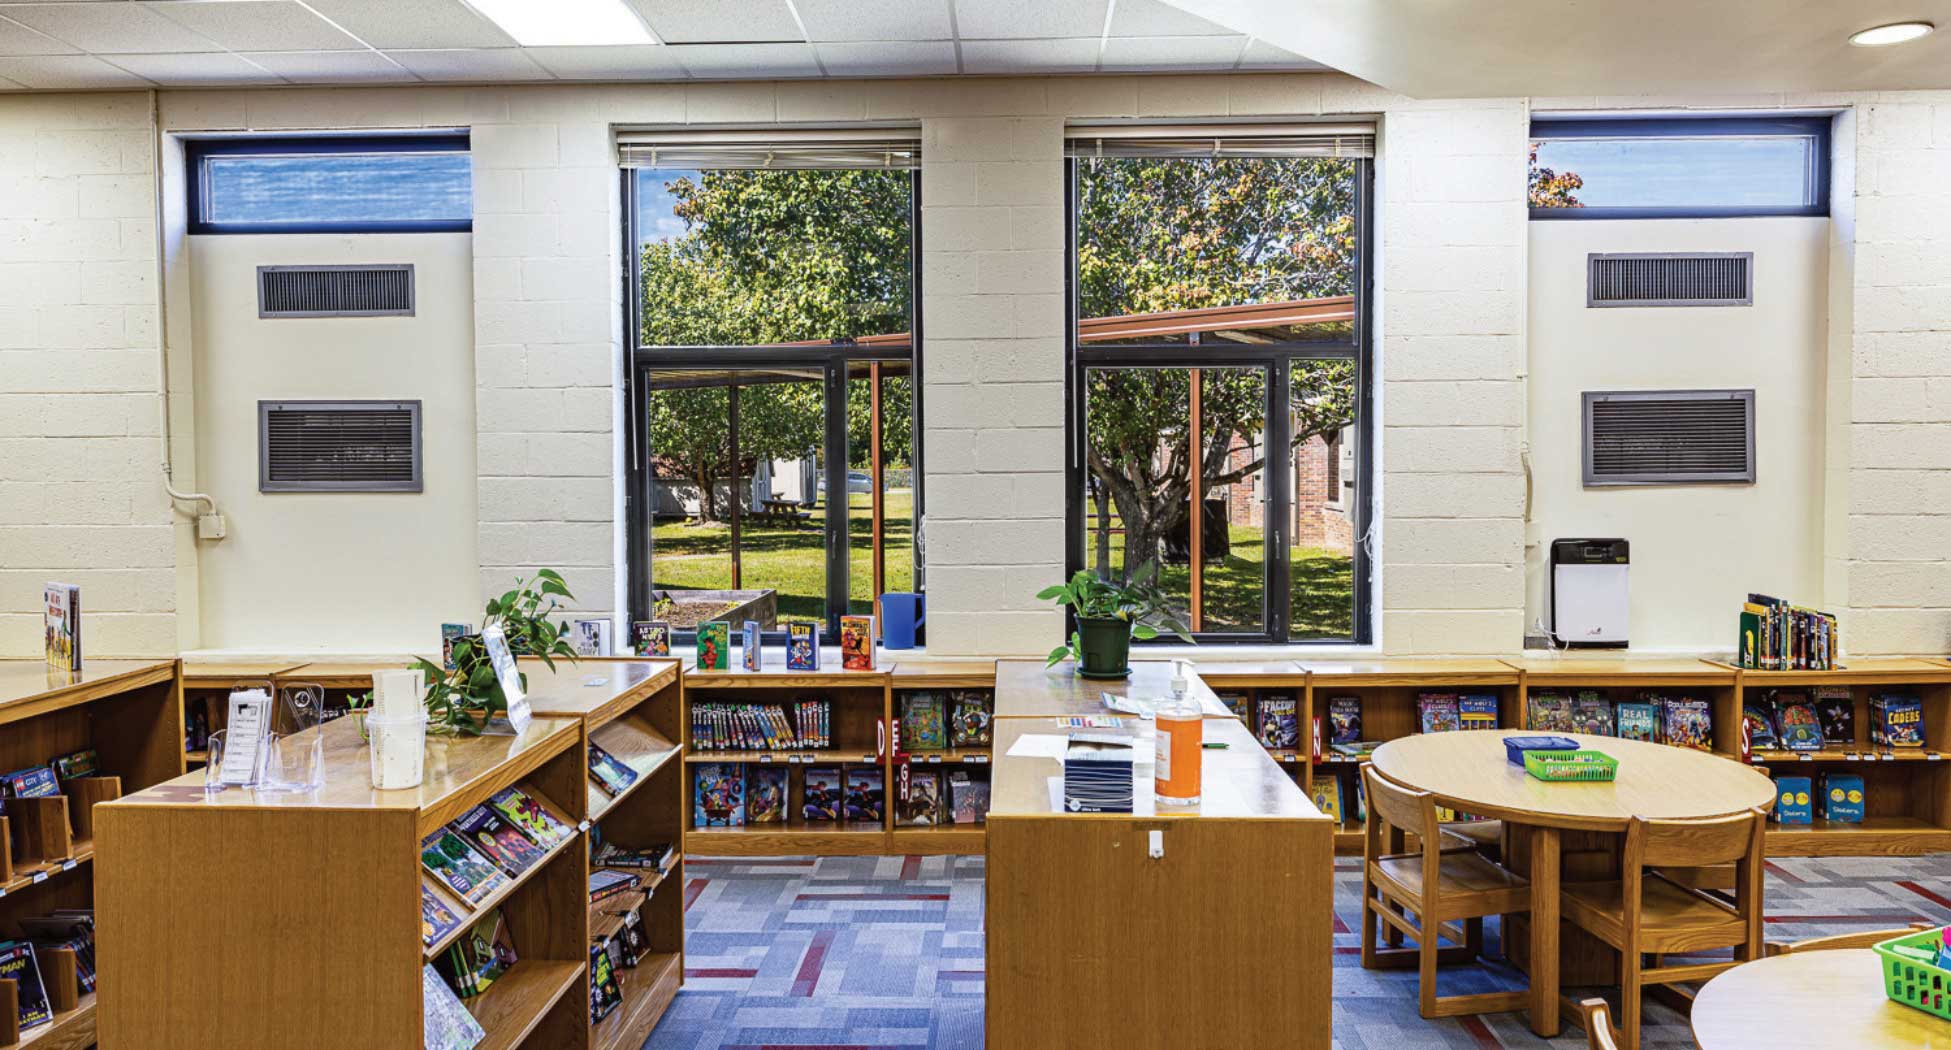 Inside view of a school library in South Carolina.